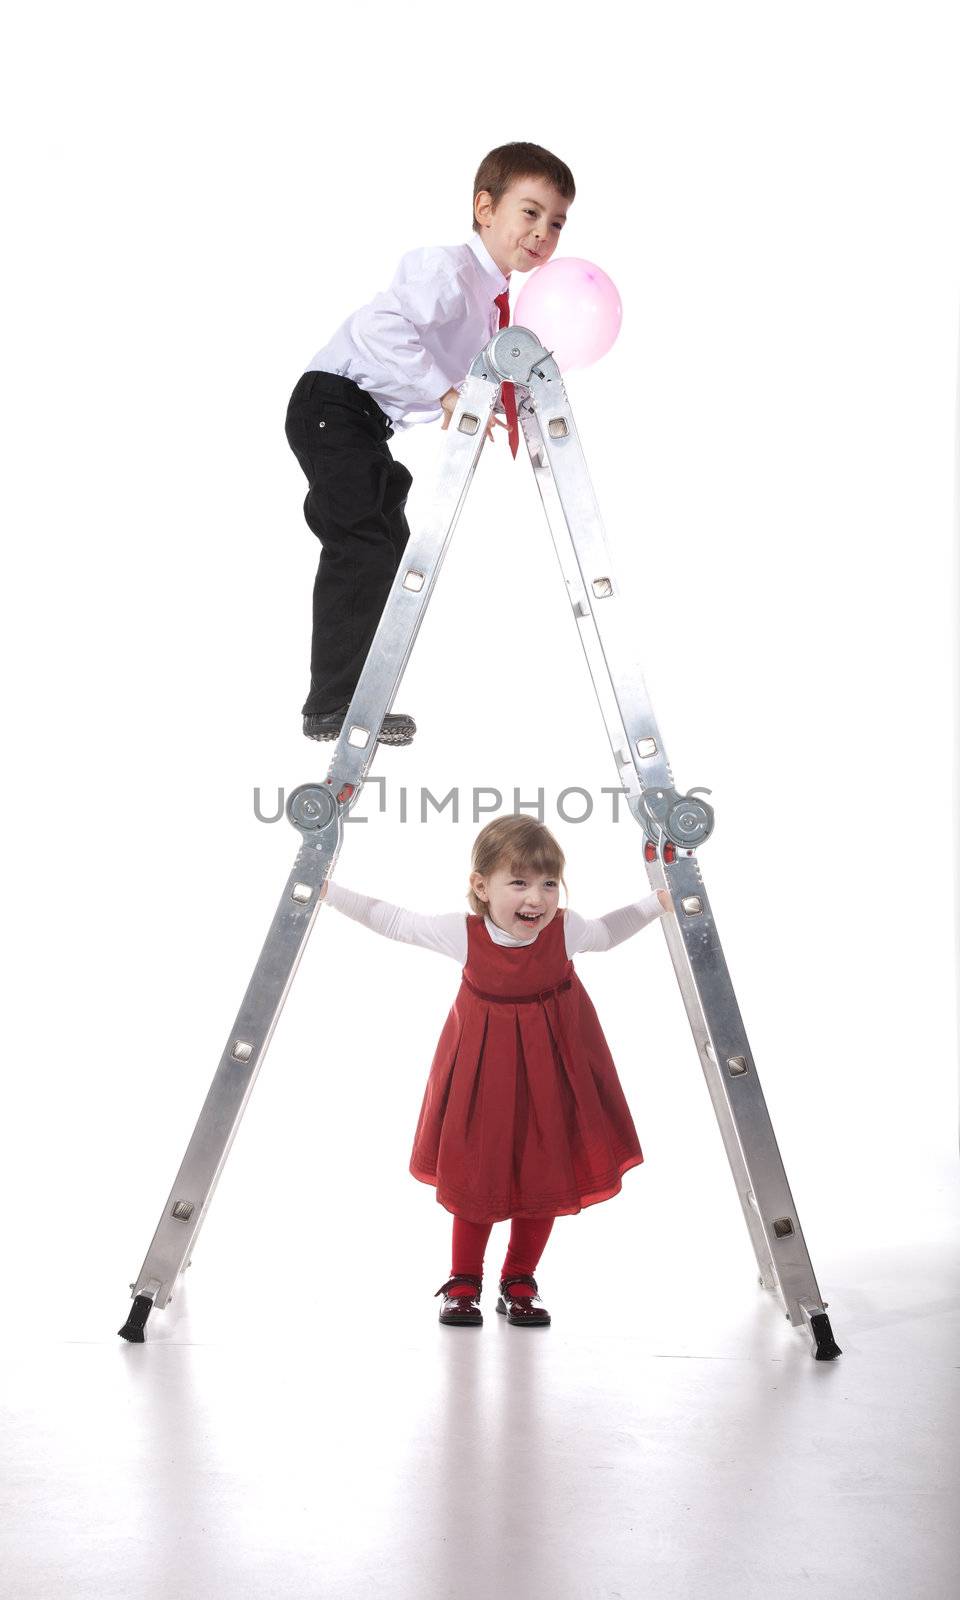 Preschoolers playng with ladder - studio shot over white